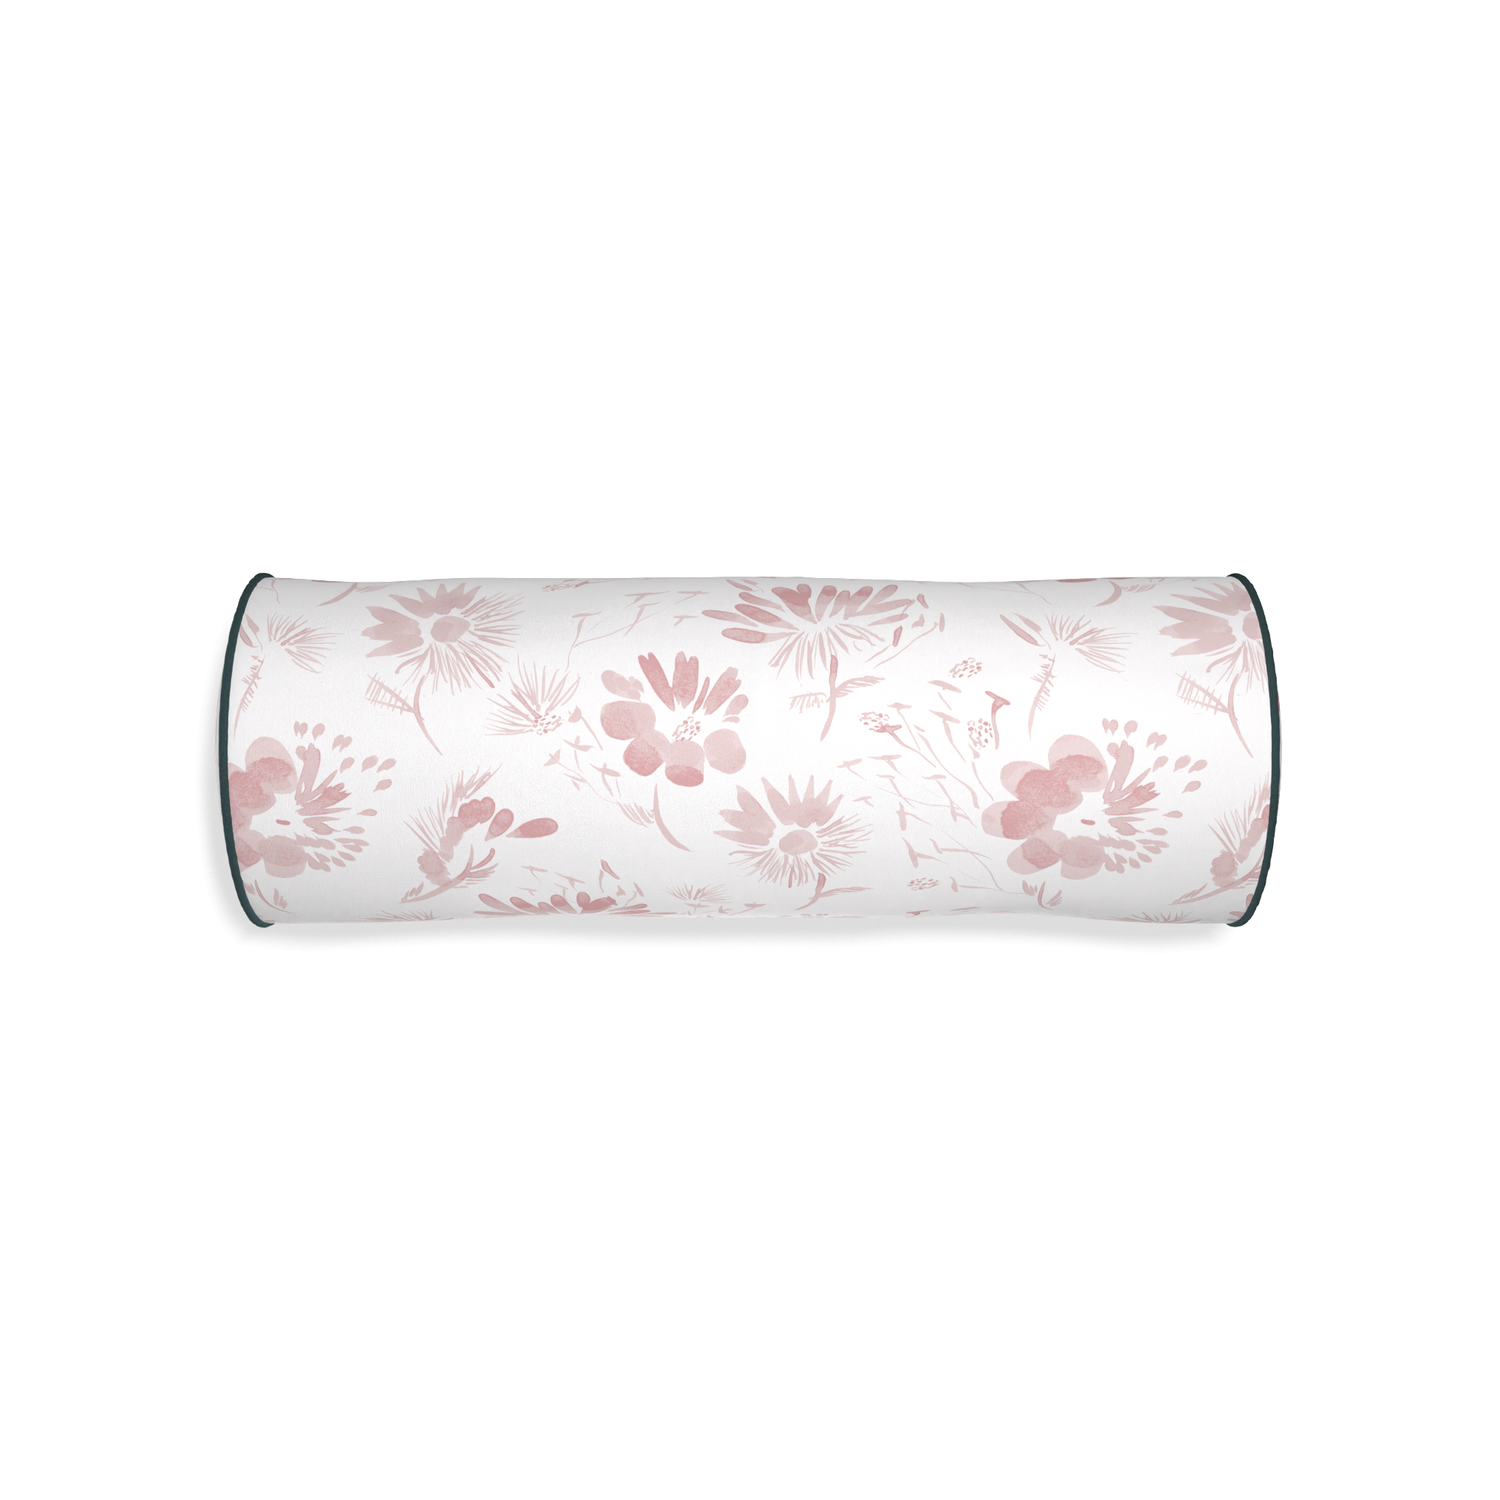 Bolster blake custom pink floralpillow with p piping on white background